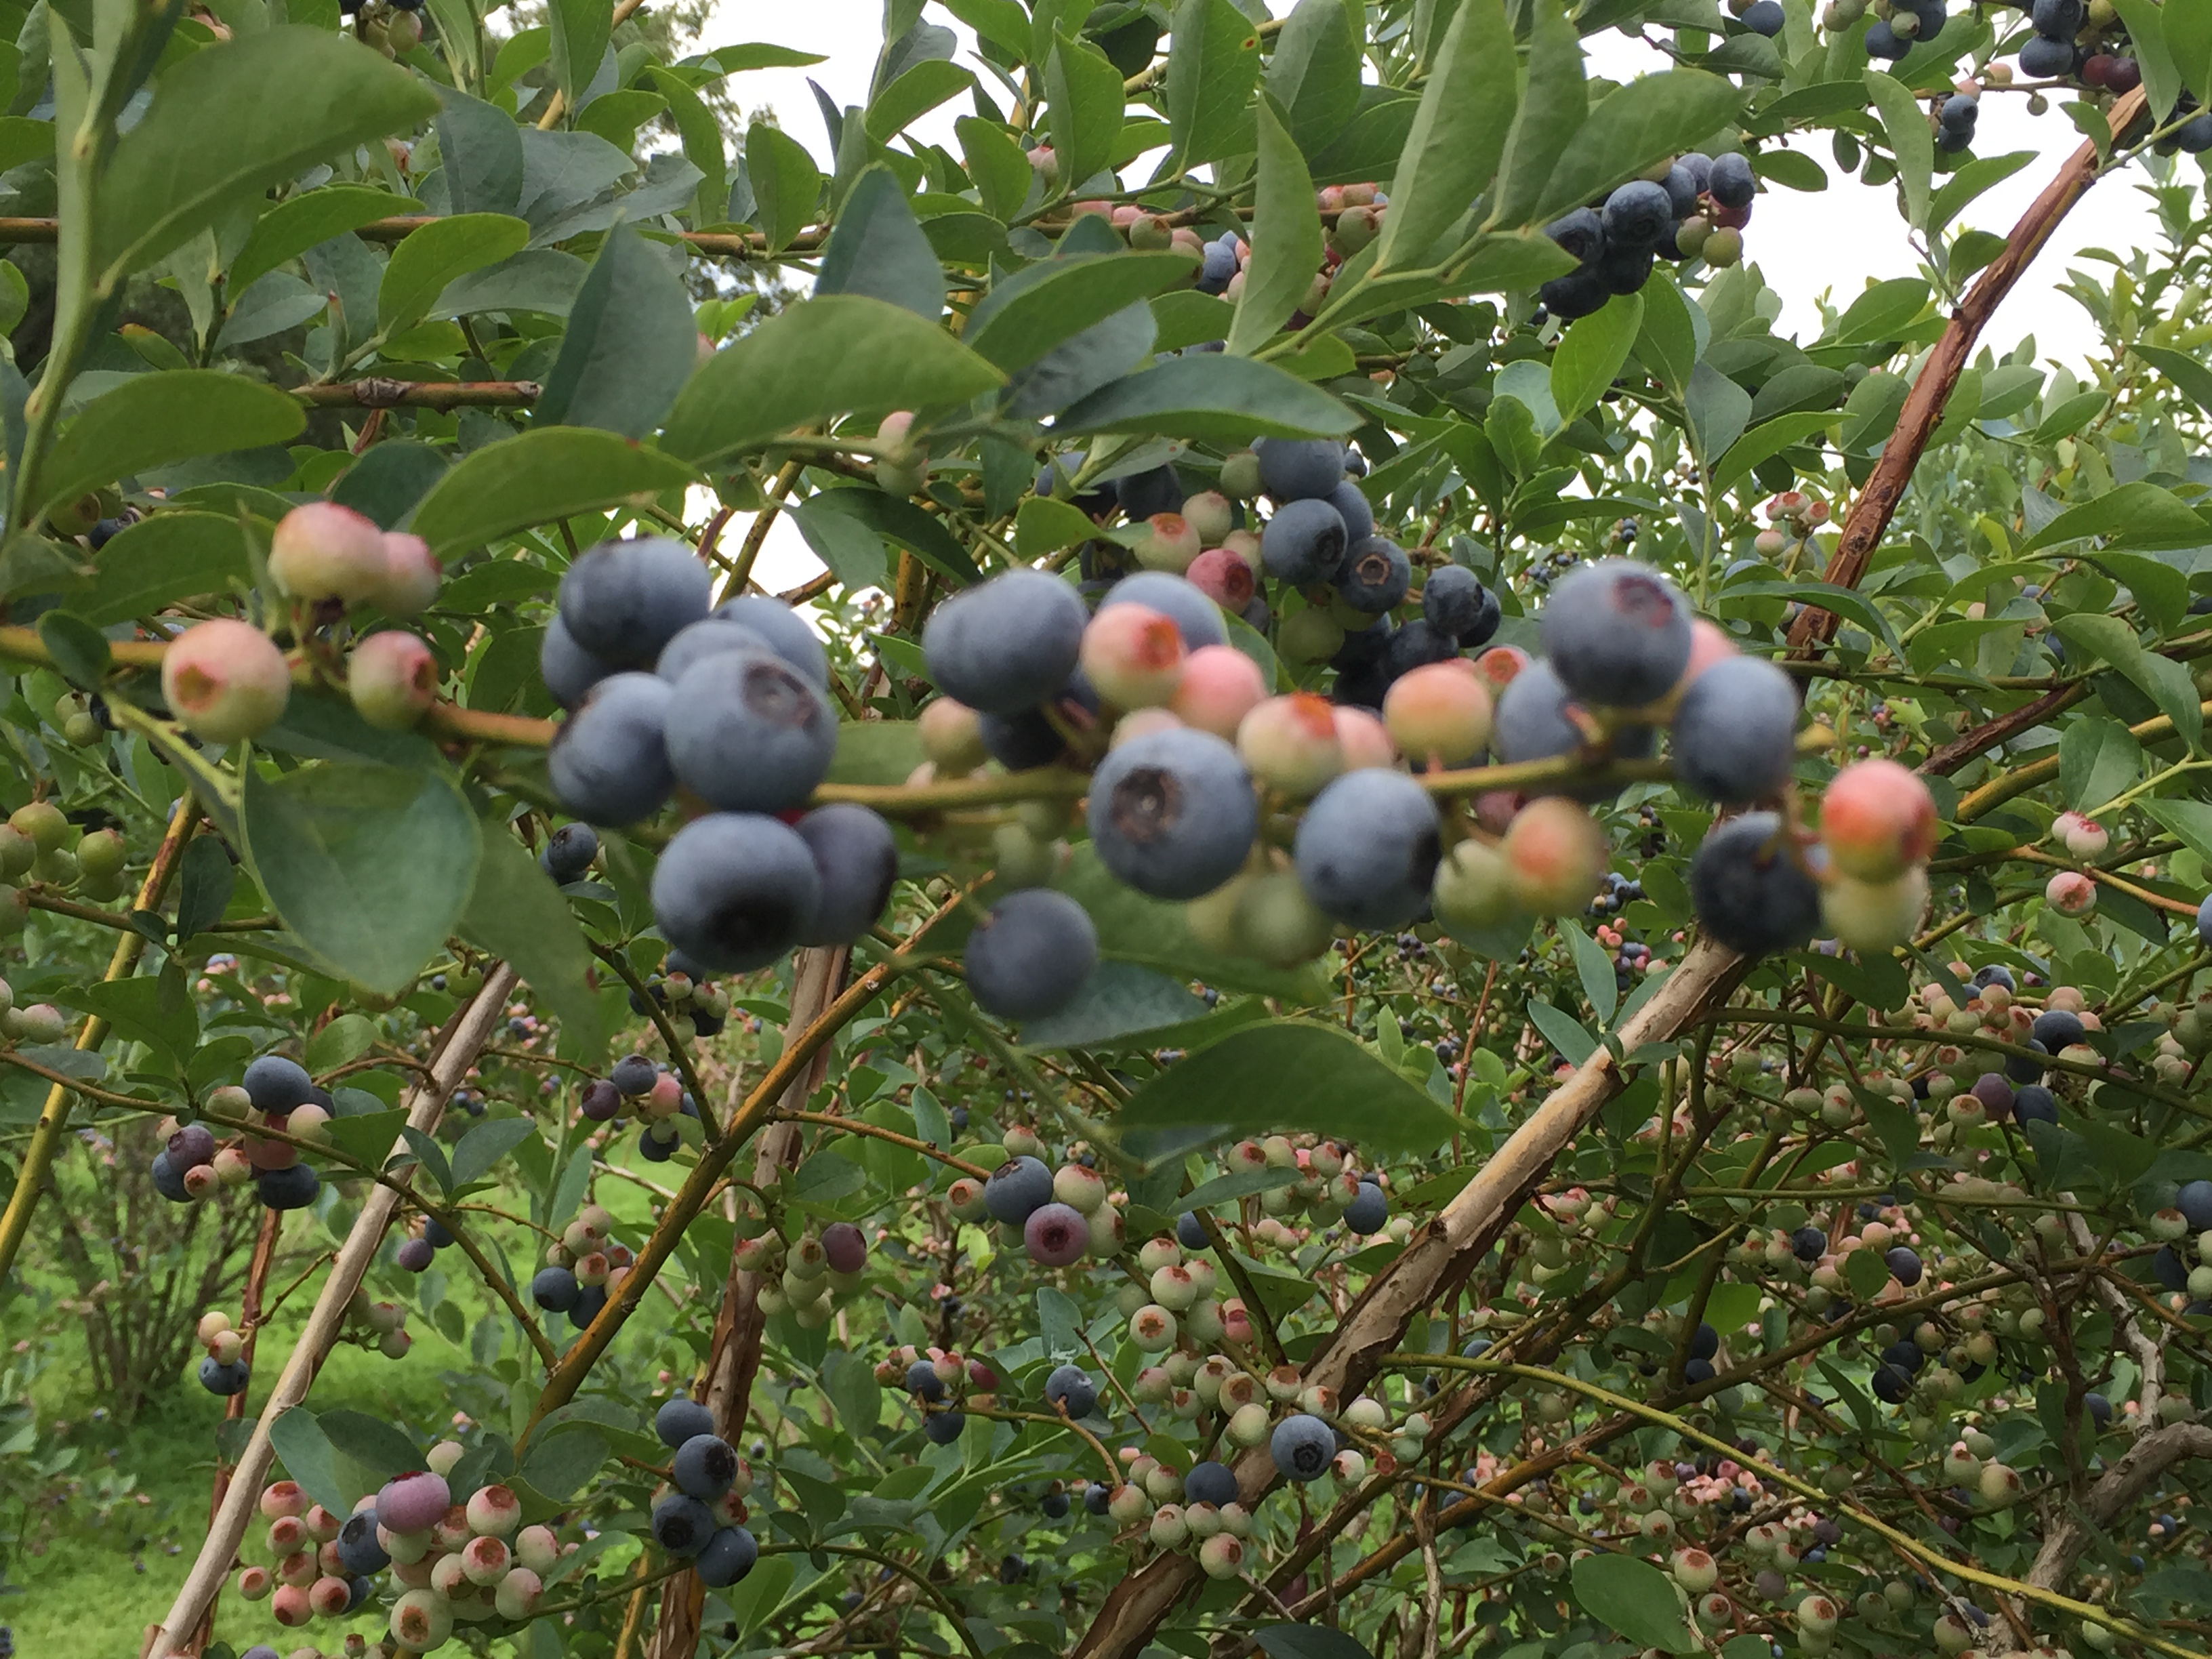 Ripe Blueberries Up Close